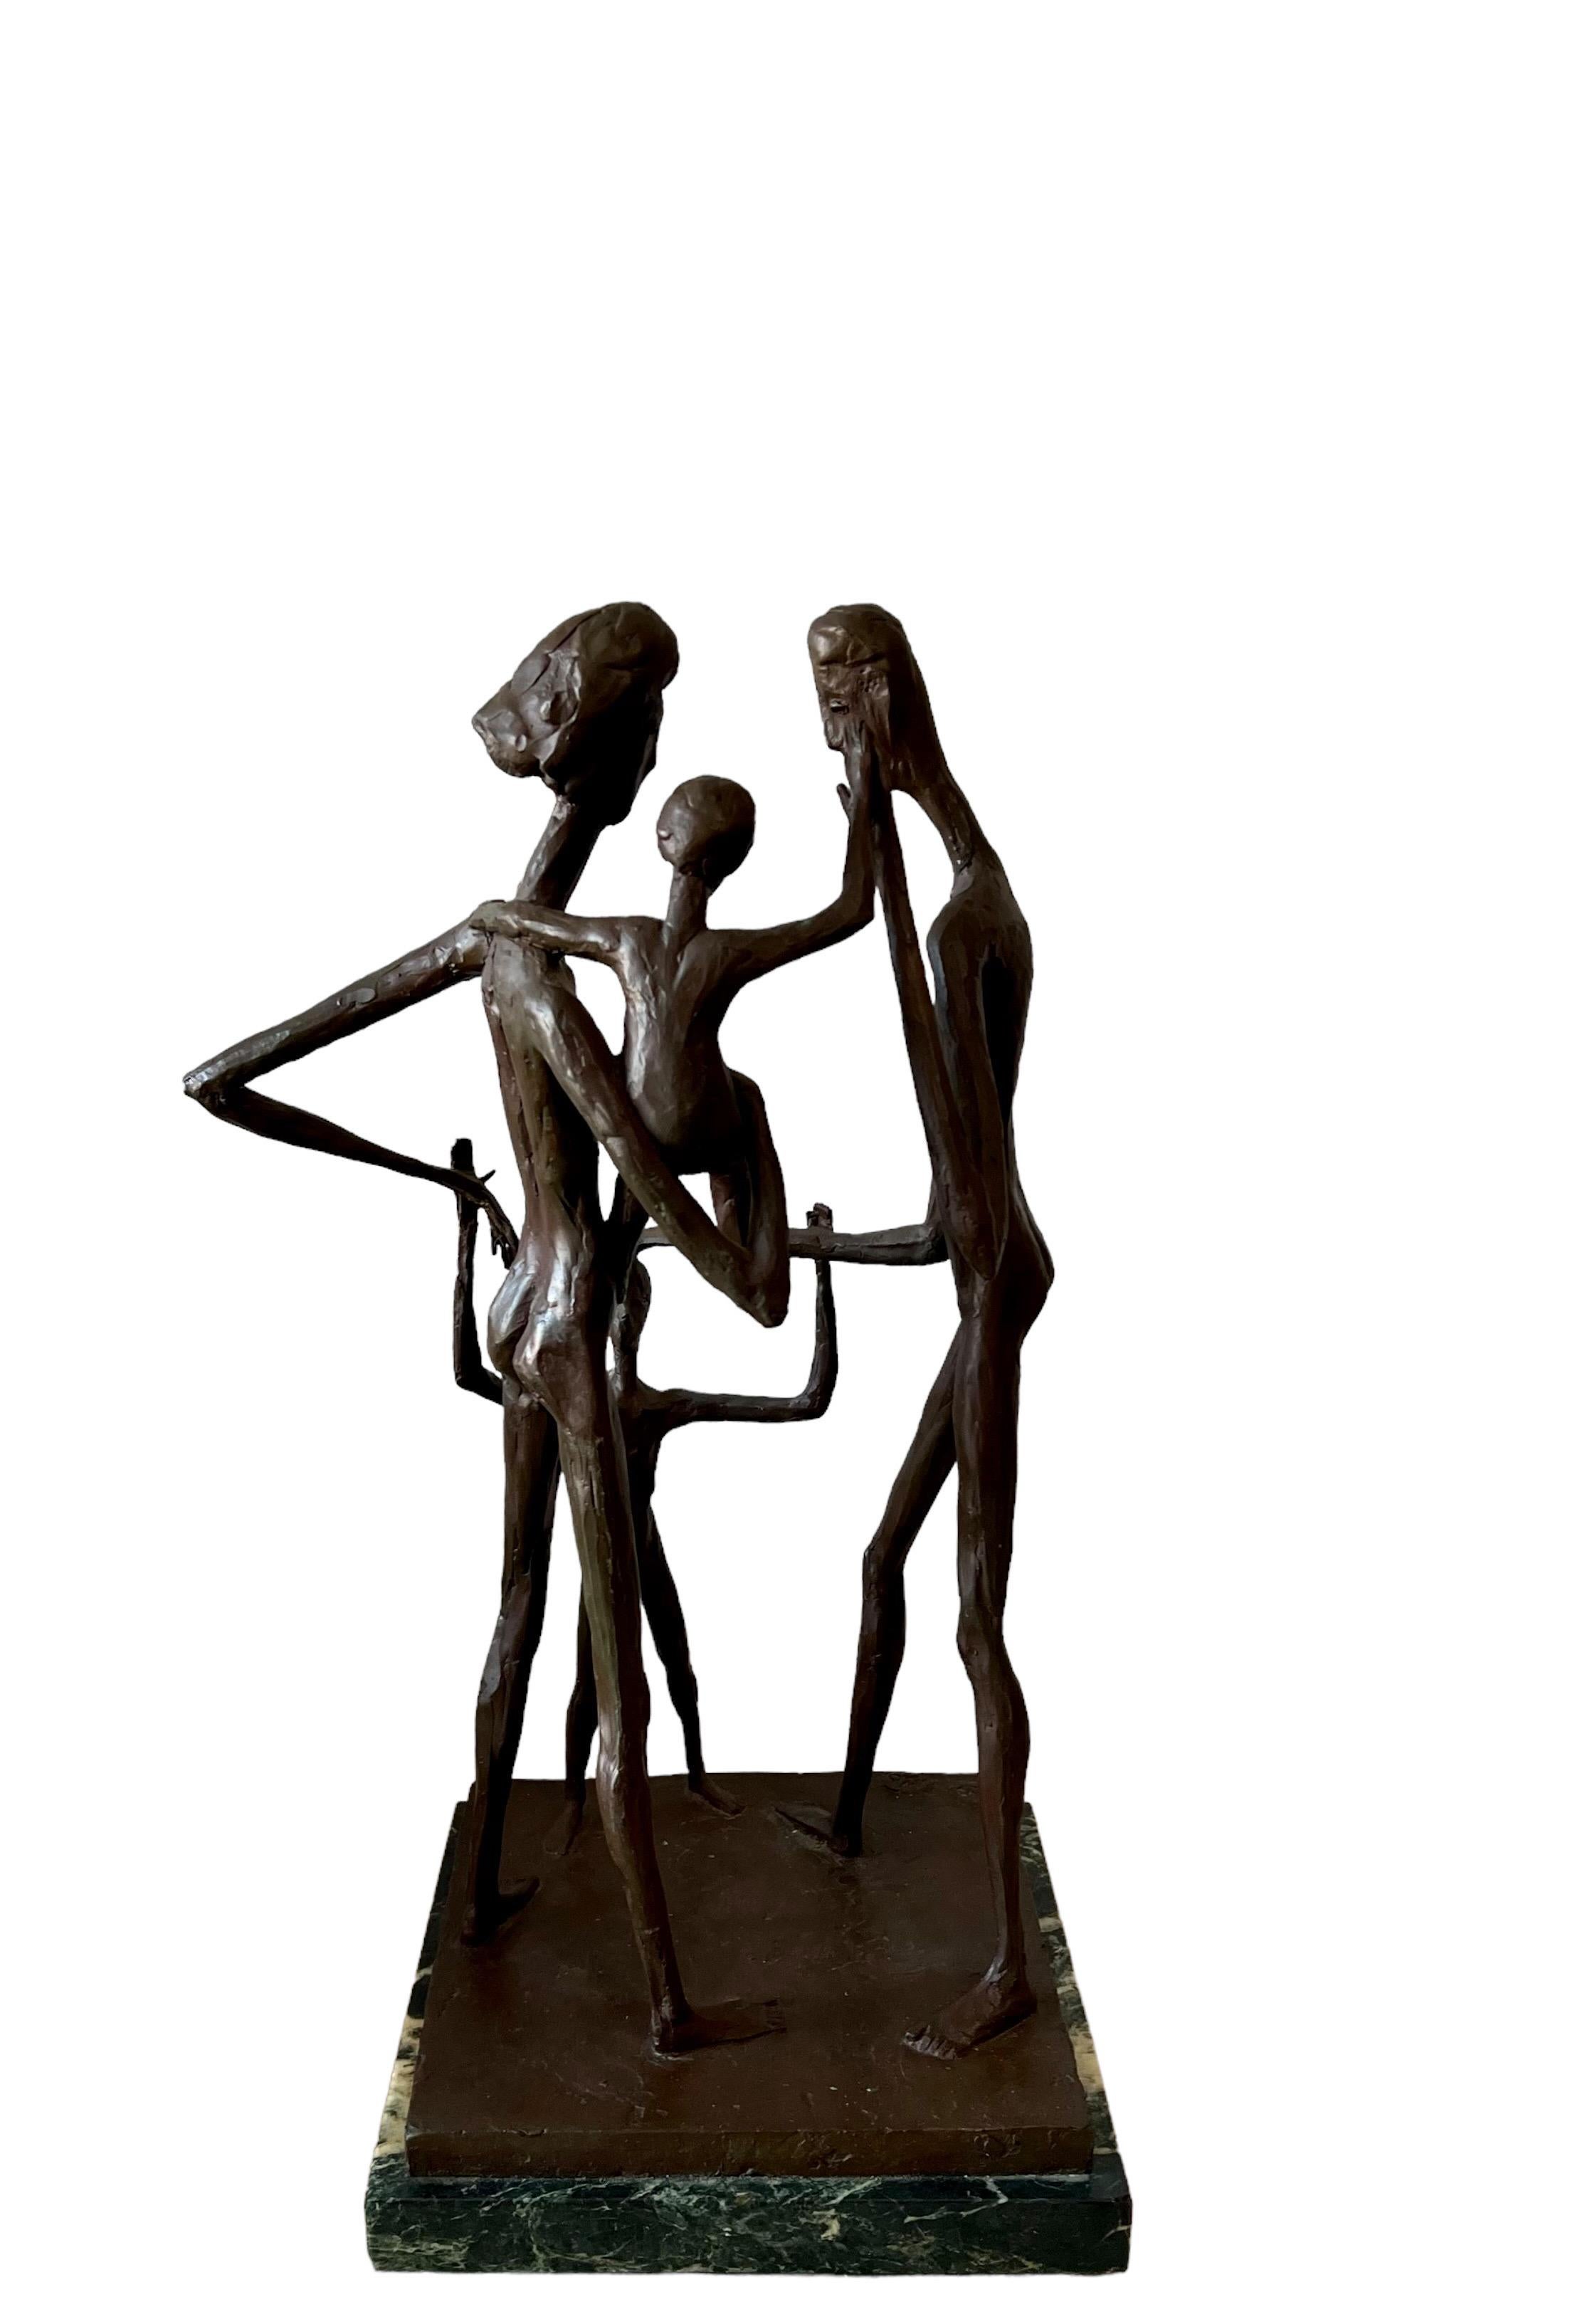 This is a mid 20th century mod abstract large bronze sculpture by Wolfgang Behl (German/American, 1918-1994). 
The sculptural group titled 